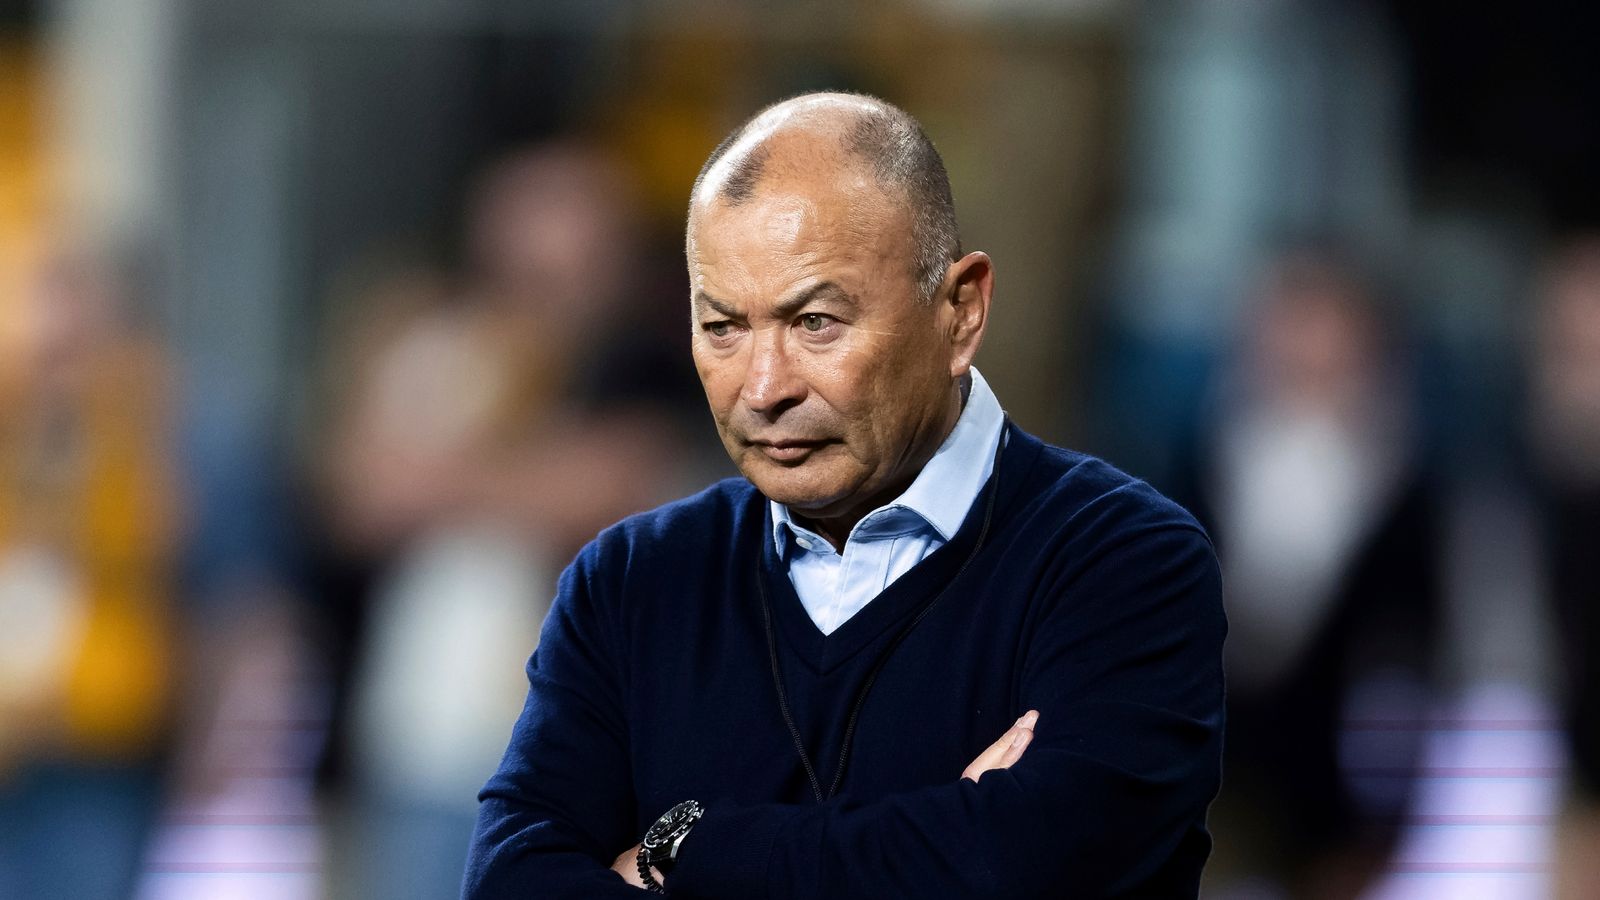 Eddie Jones: Australia head coach resigns after dismal Rugby World Cup campaign | Rugby Union News